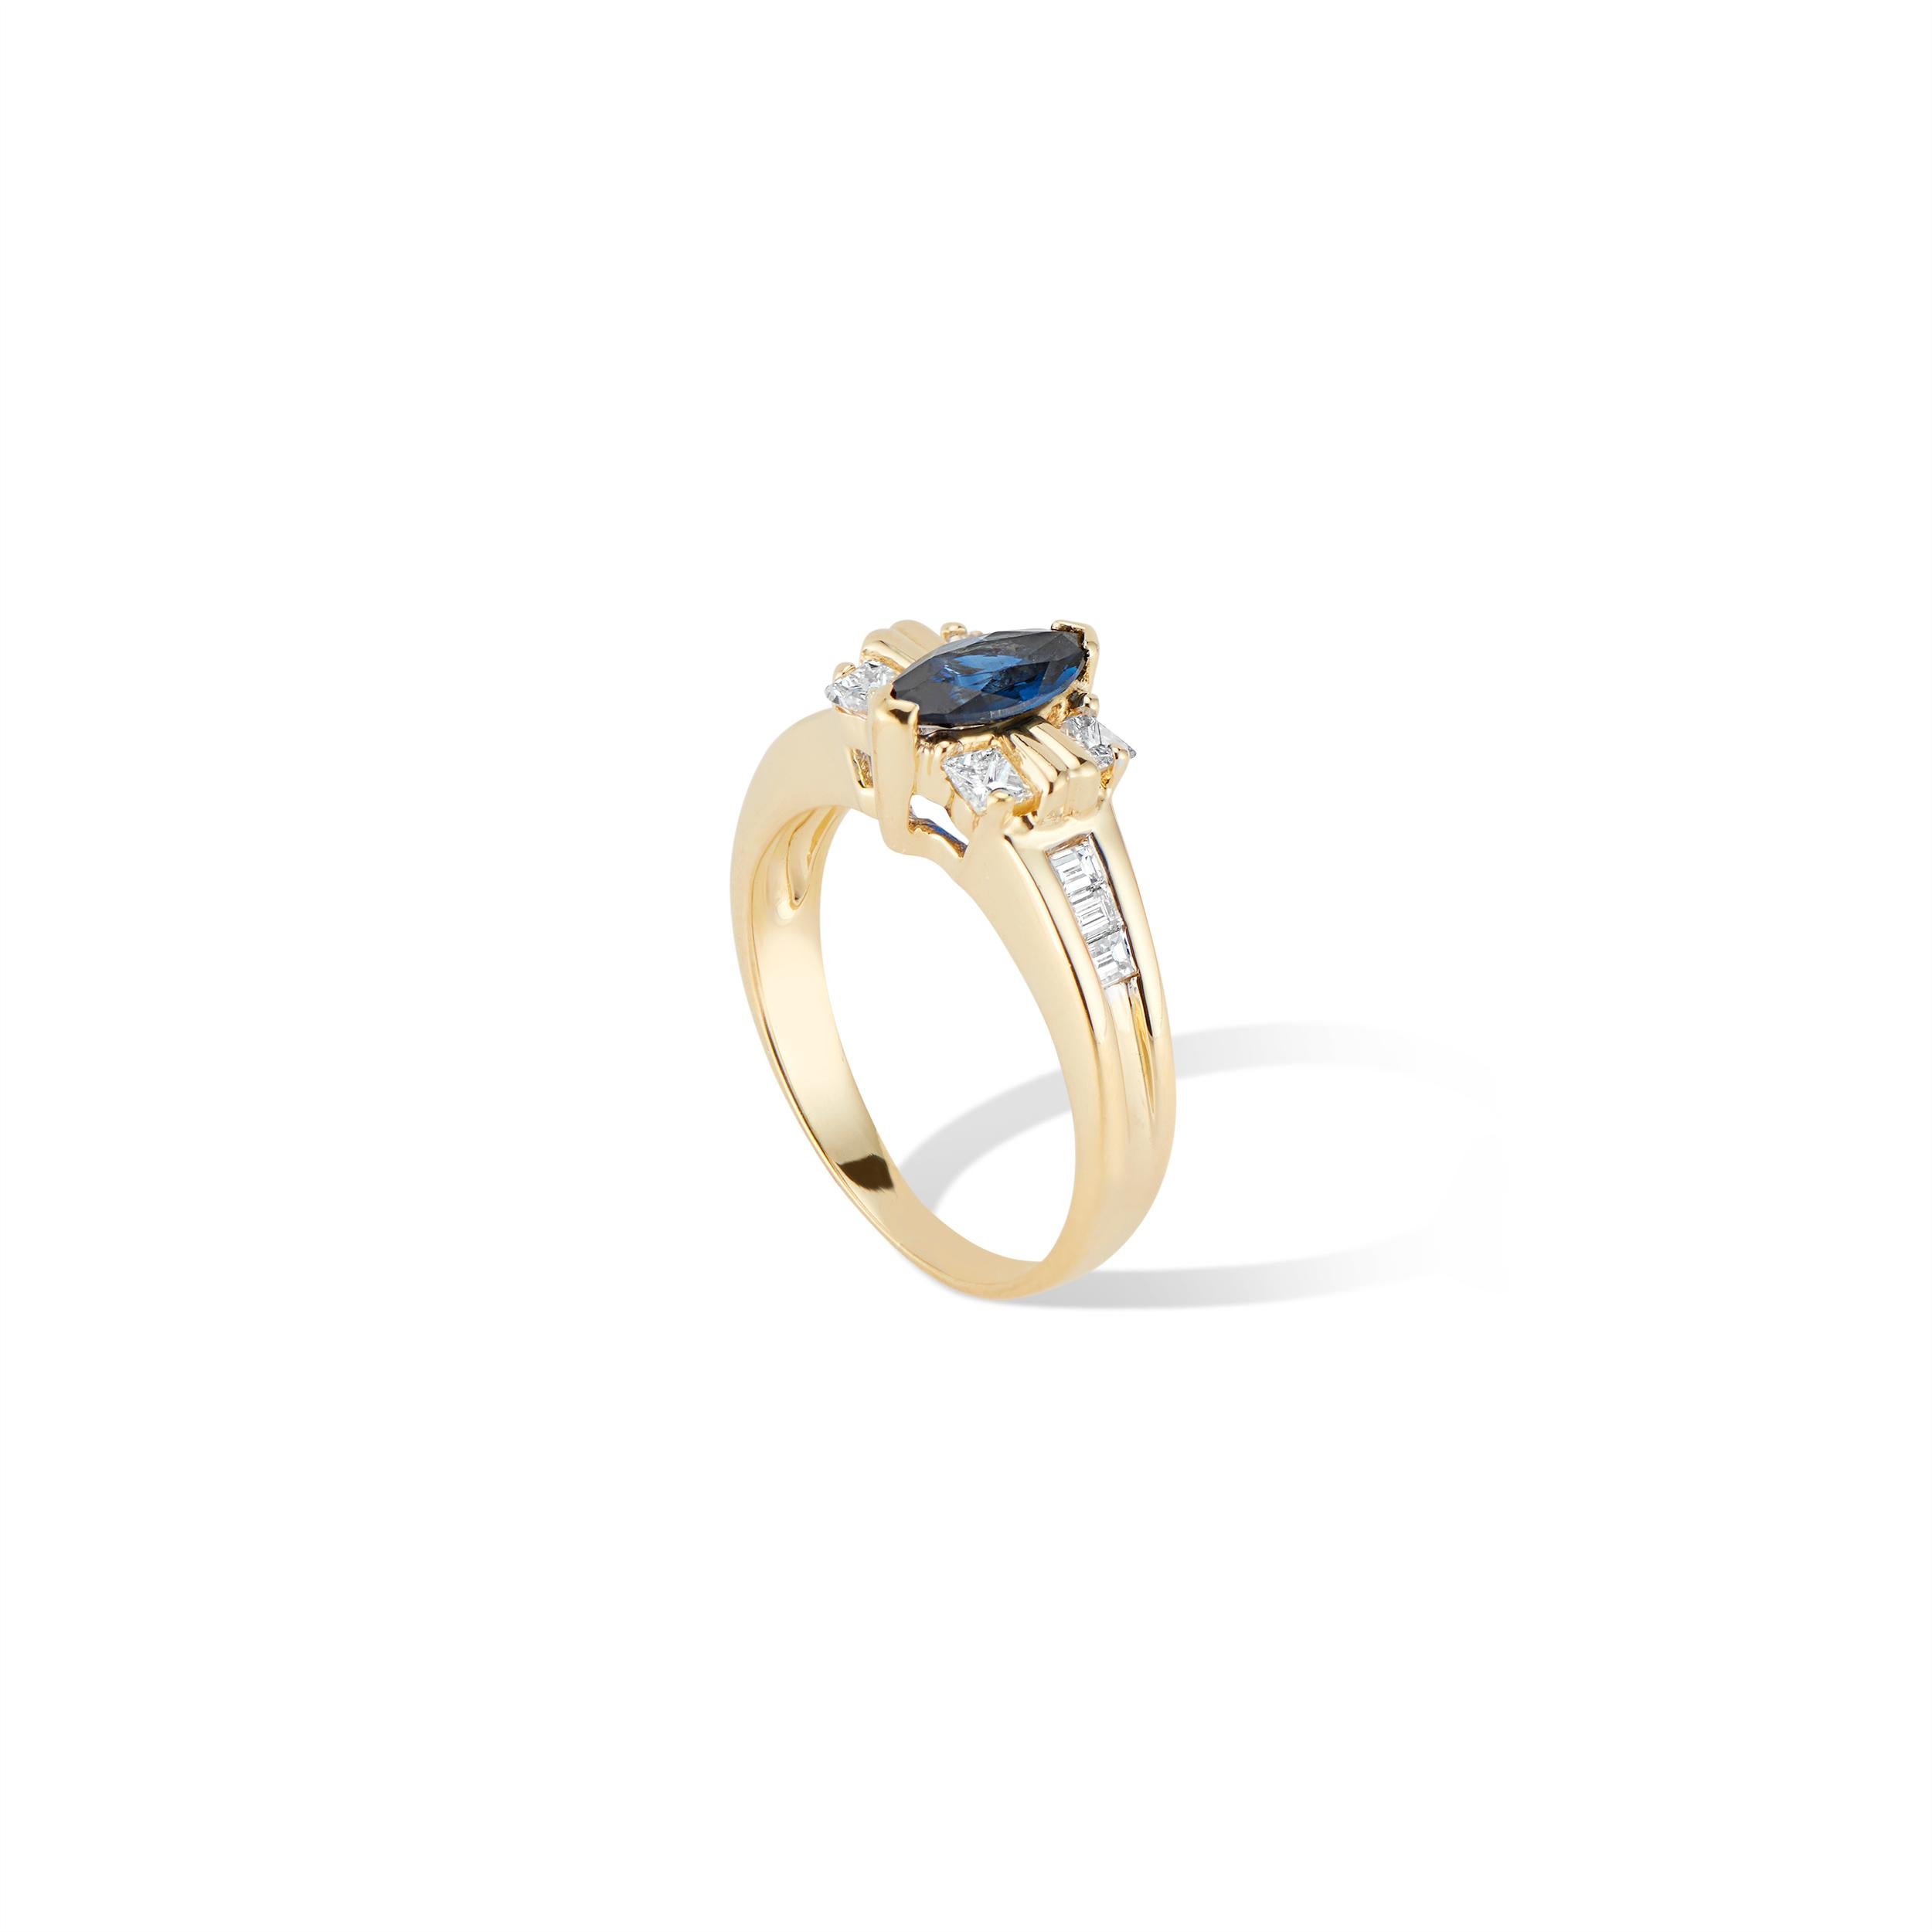 Beautiful Vintage 18kt Yellow Gold Sapphire and Diamond ring from the 1970’s era.
Featuring a .50ct Marquise Sapphire, with 2 princess cut diamonds on each side with a unique gold ridge detail and 3 diamond baguettes down each side of the band.
A